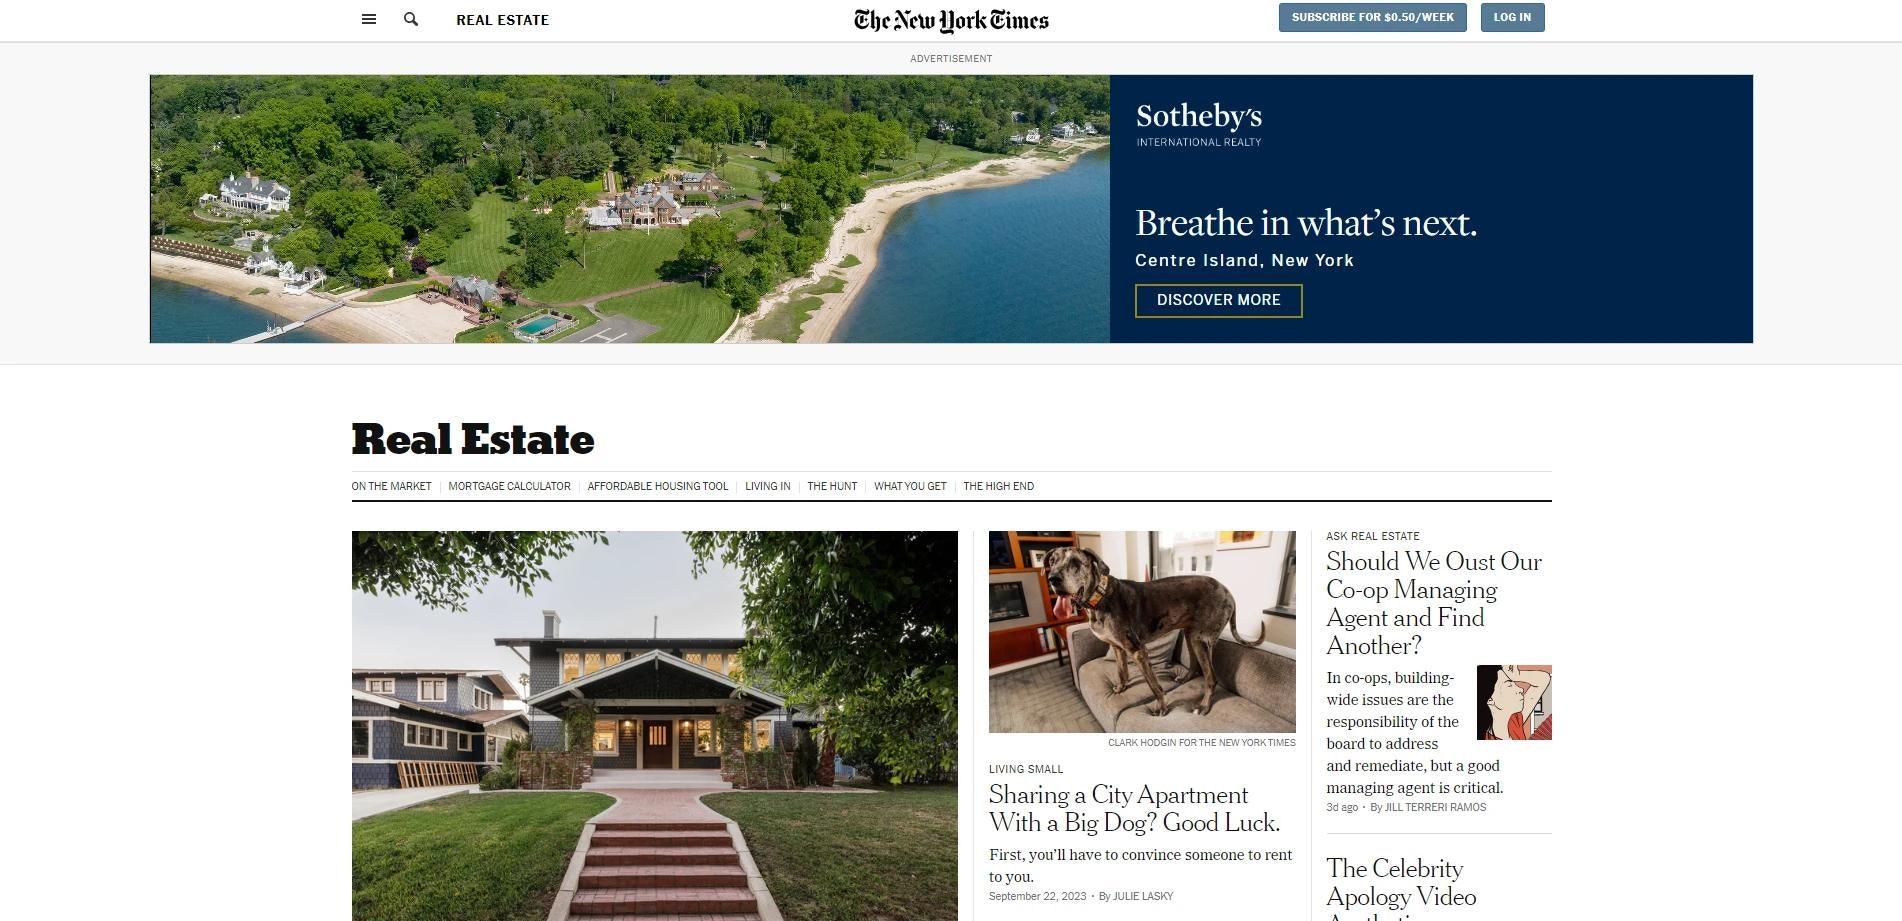 The New York Times – Real Estate real estate blog